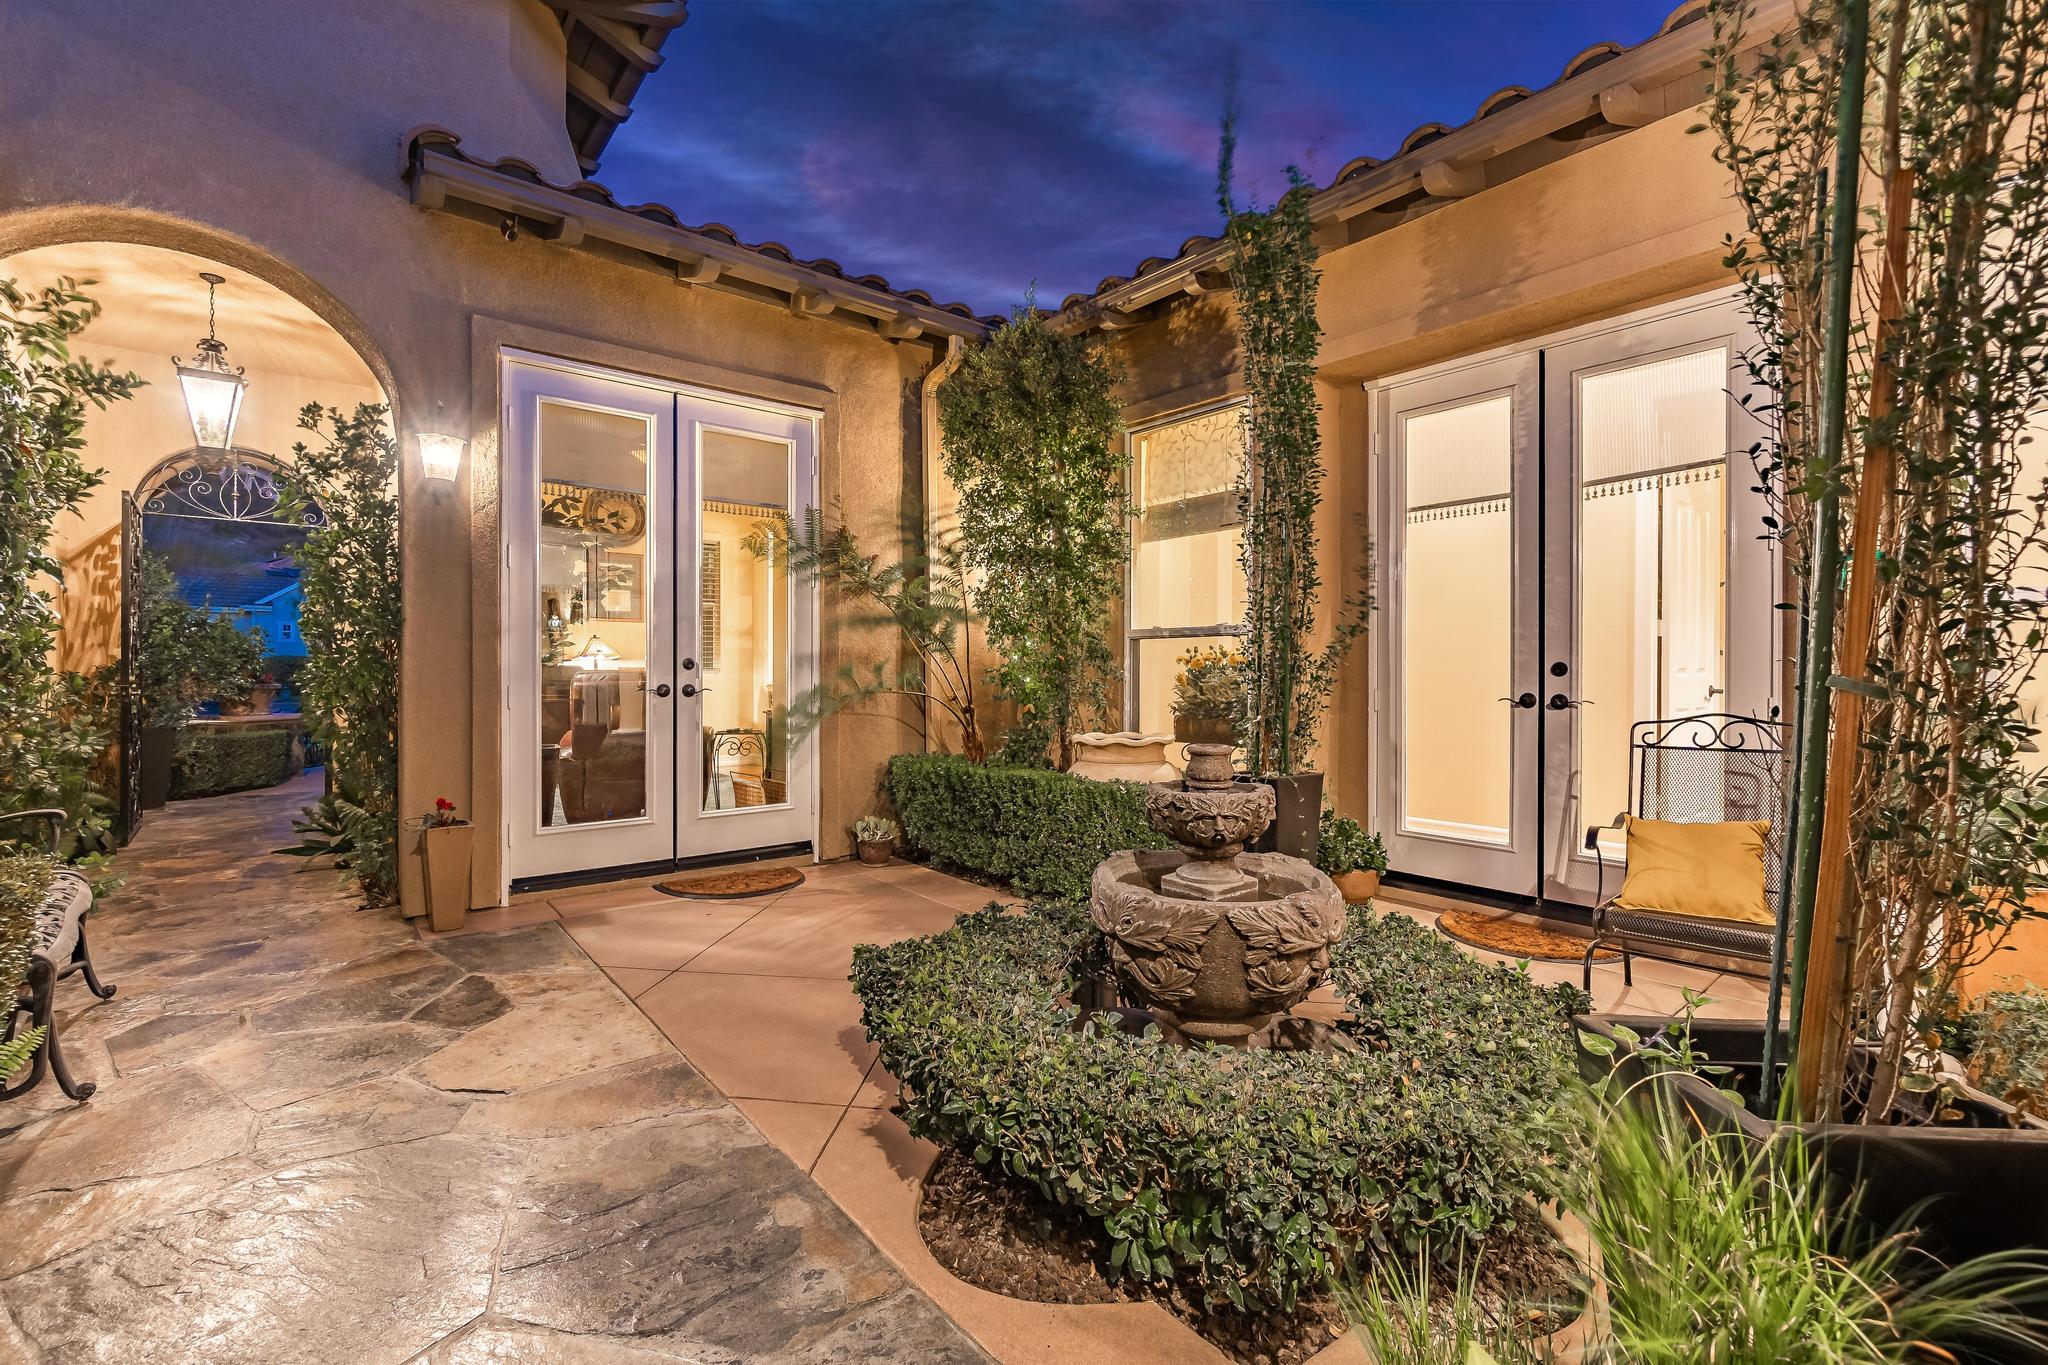 Tuscan-Inspired Olinda Ranch Villa – 467 Tangerine Place, Brea, CA 92823 - Angled View of Front French Doors and Entrance Gate with Fountain